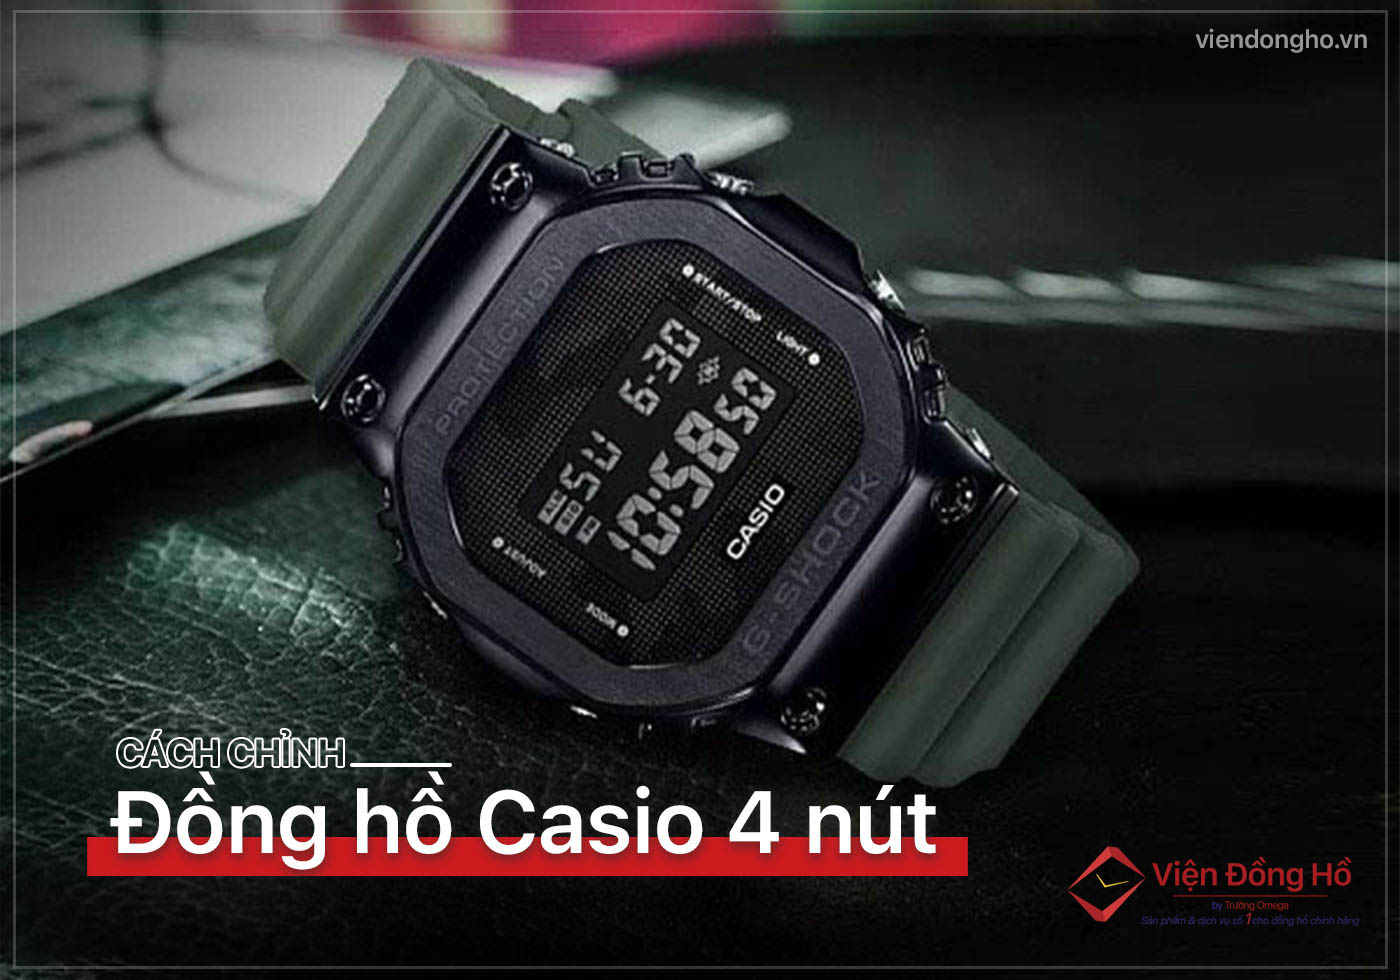 Cach chinh dong ho Casio 4 nut don gian nhat 6